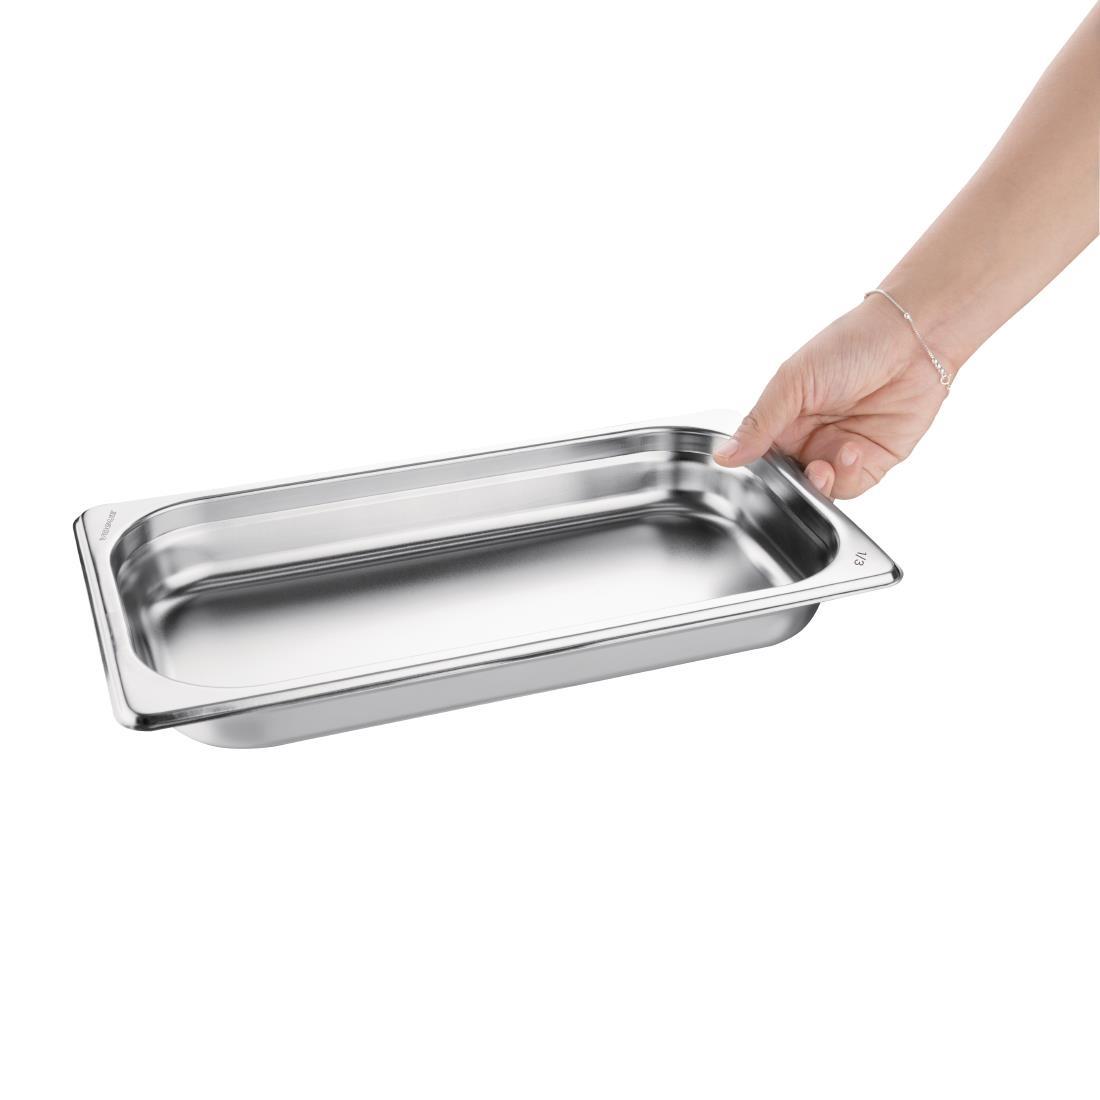 Vogue Stainless Steel 1/3 Gastronorm Pan 40mm - GM311  - 2